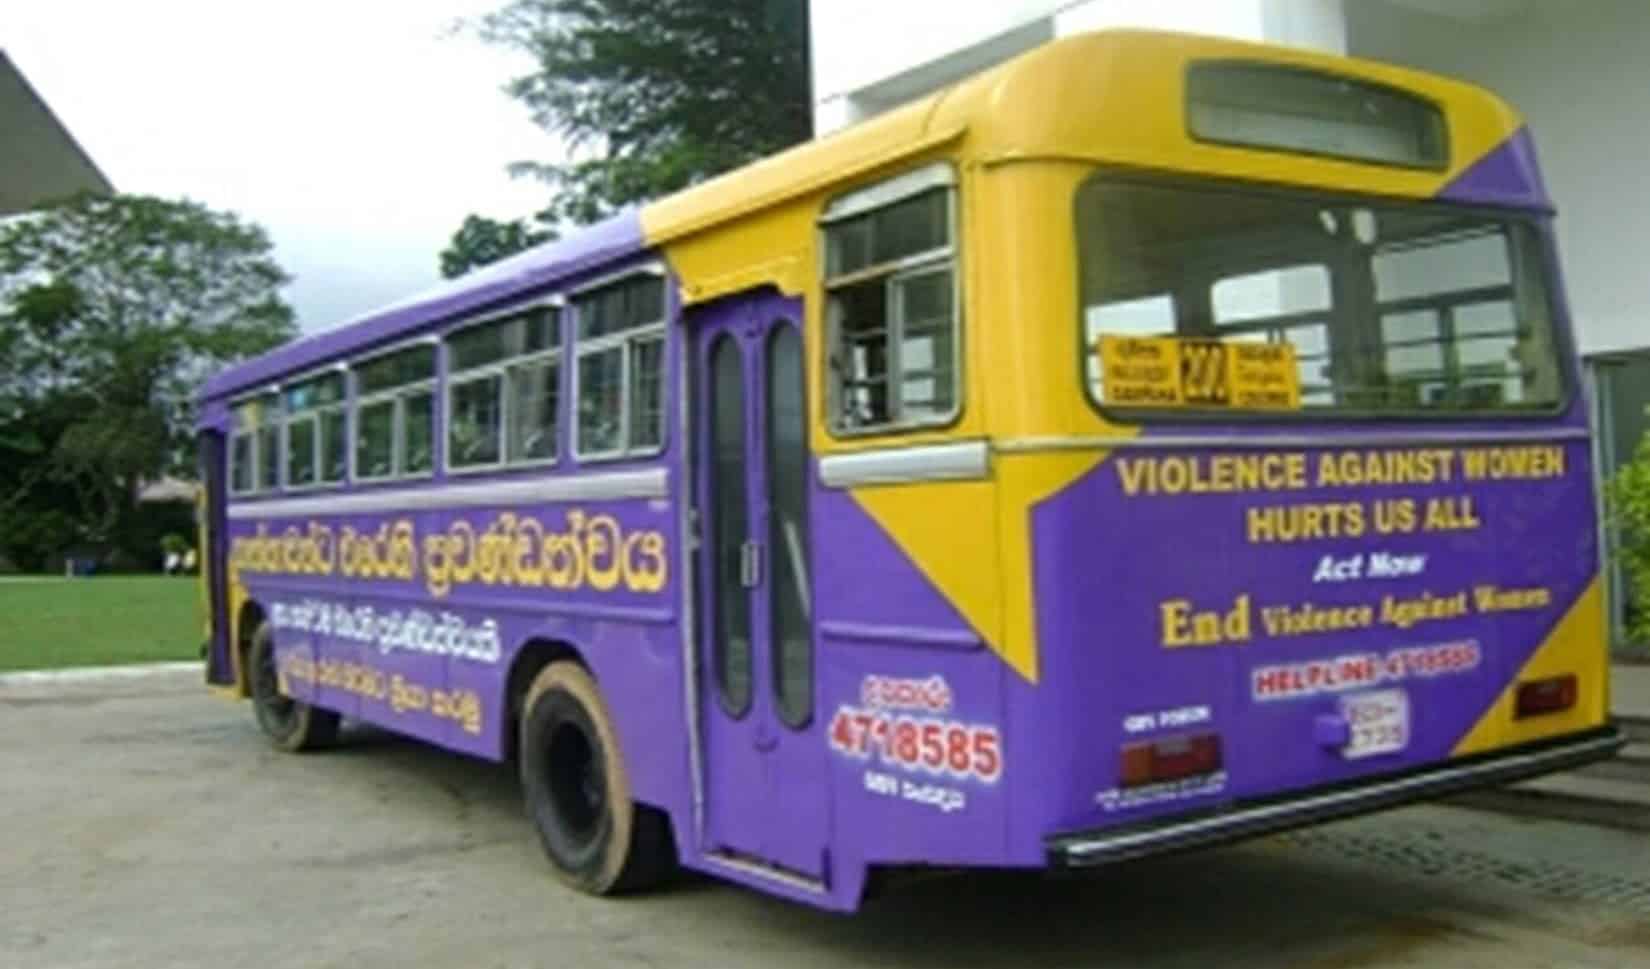 A purple and yellow bus with 